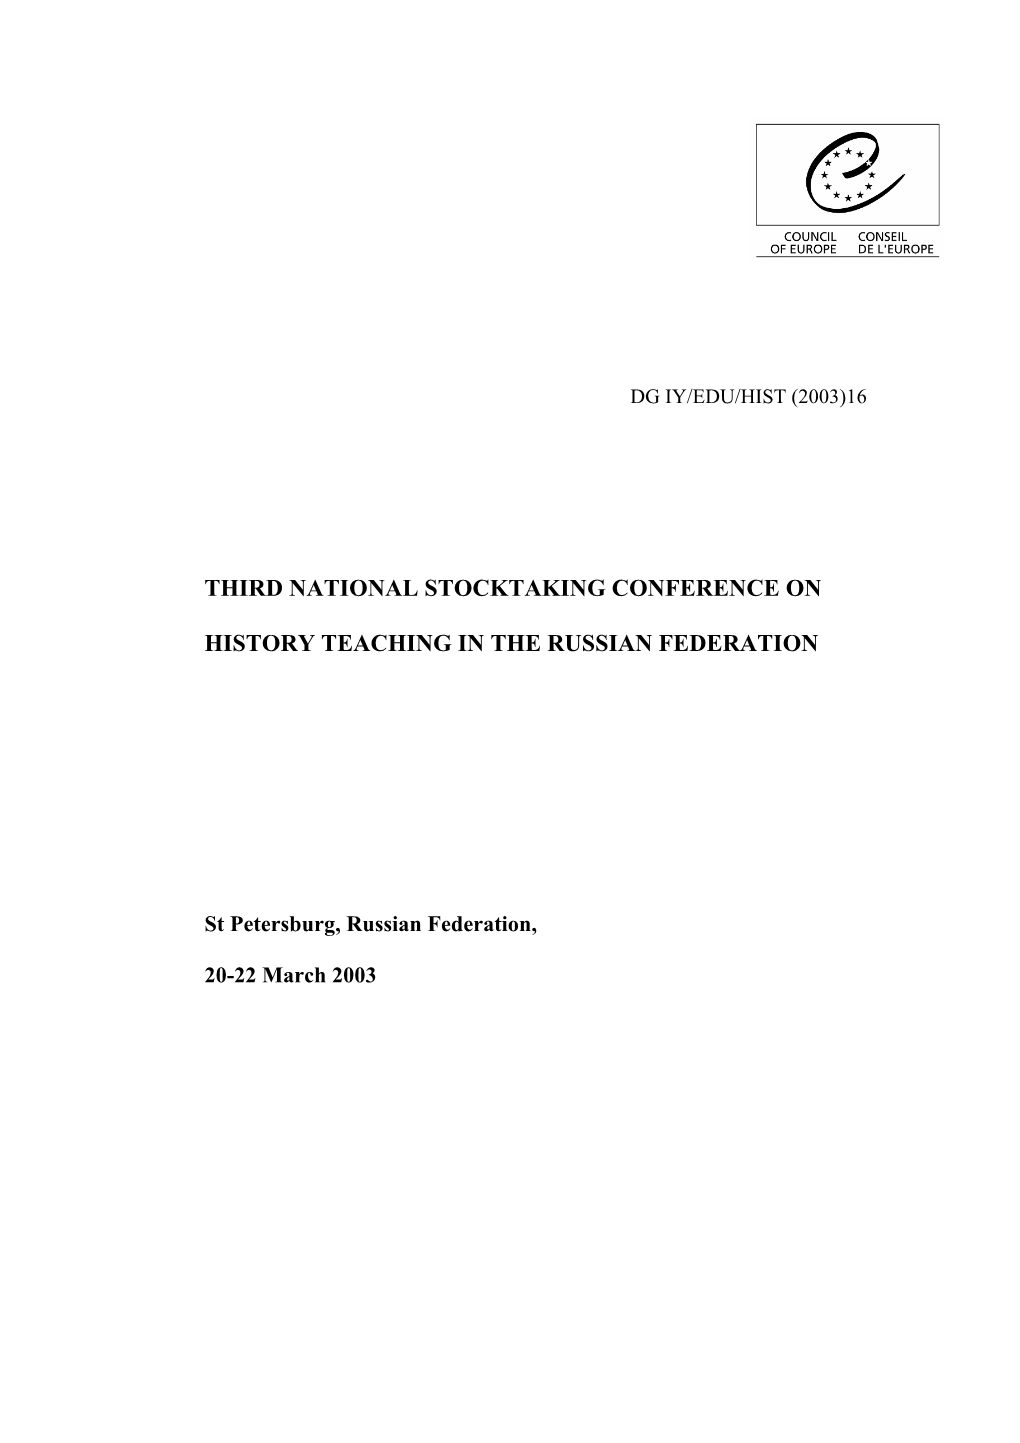 Third National Stocktaking Conference on History Teaching in the Russian Federation